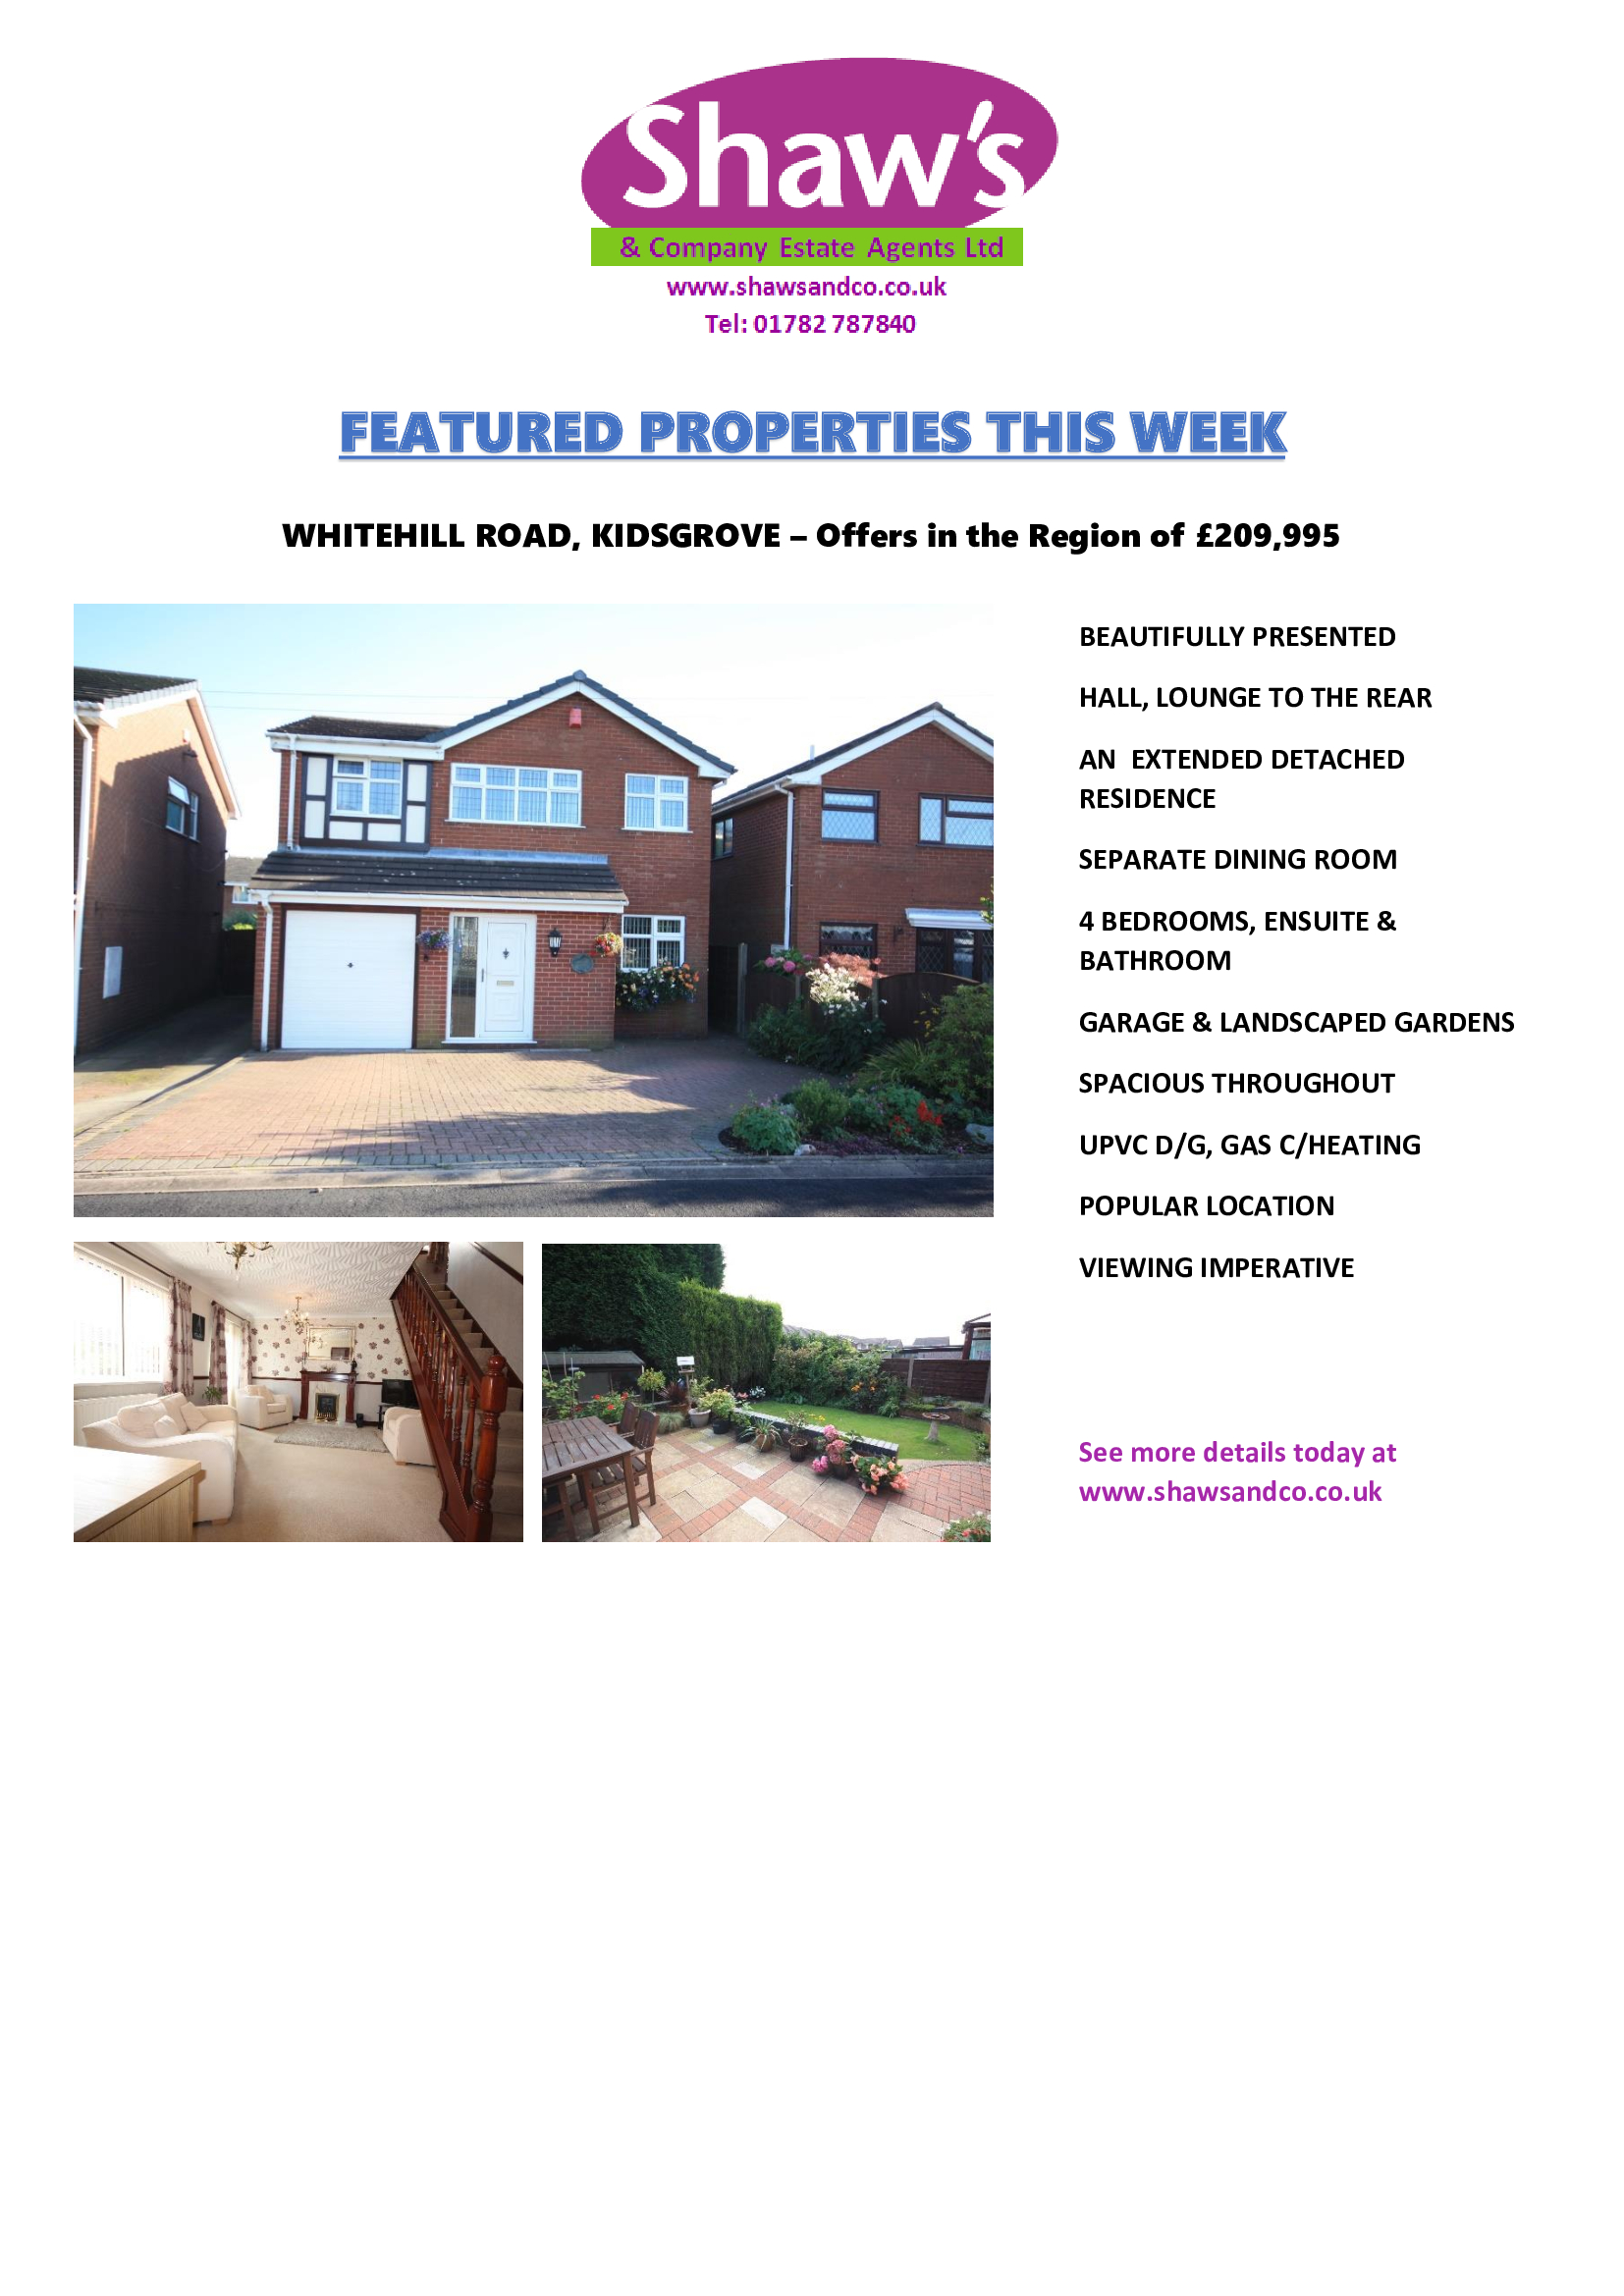 SHAW'S & CO - FEATURED PROPERTIES THIS WEEK